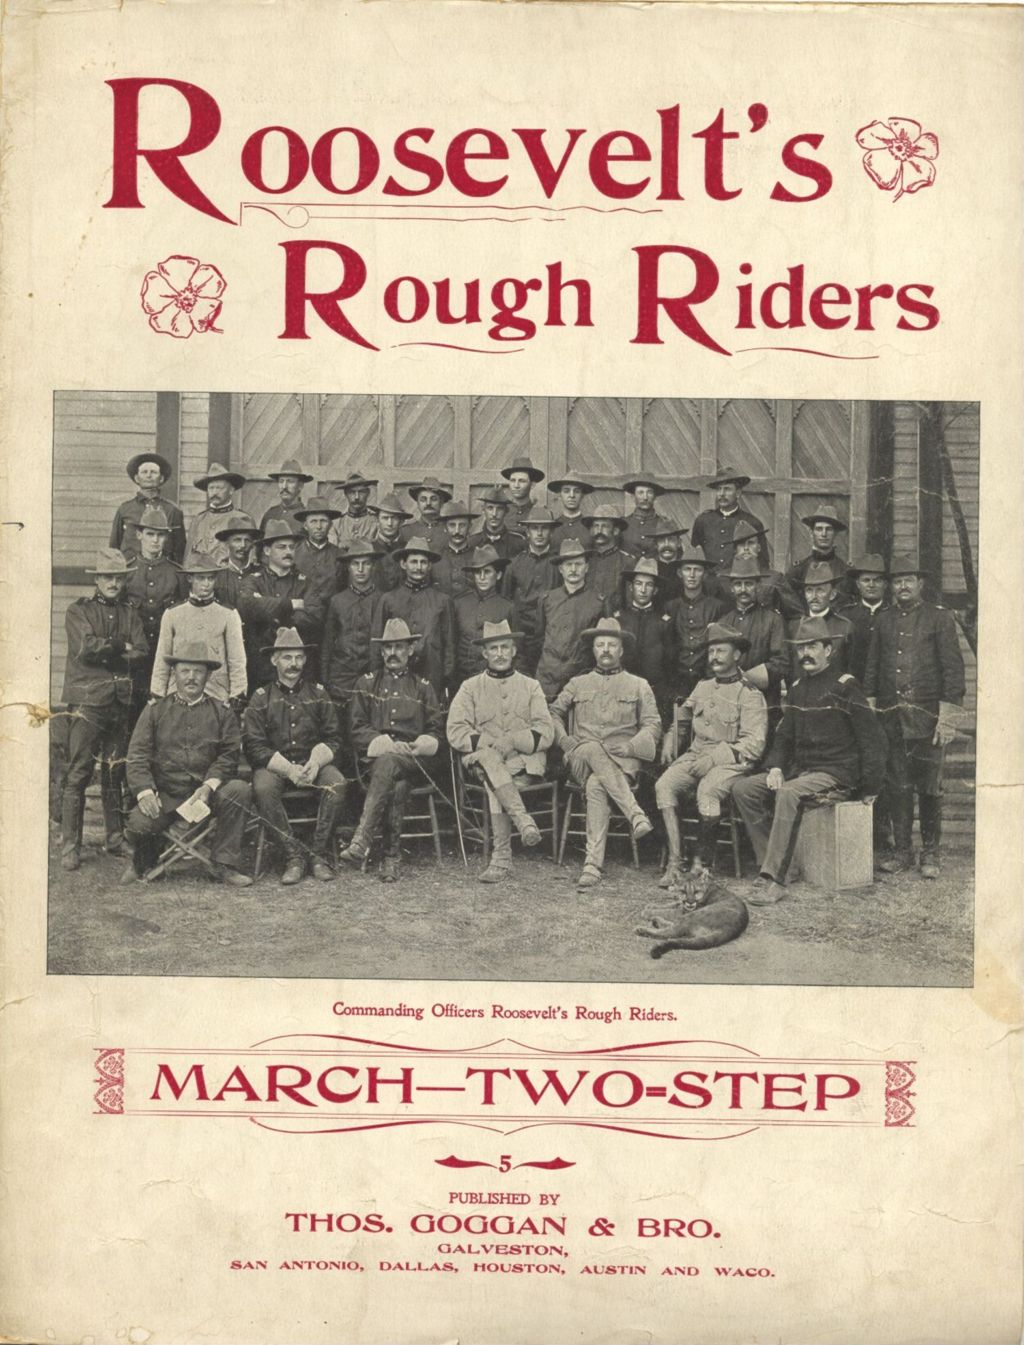 Miniature of Roosevelt's Rough Riders (March - Two Step)